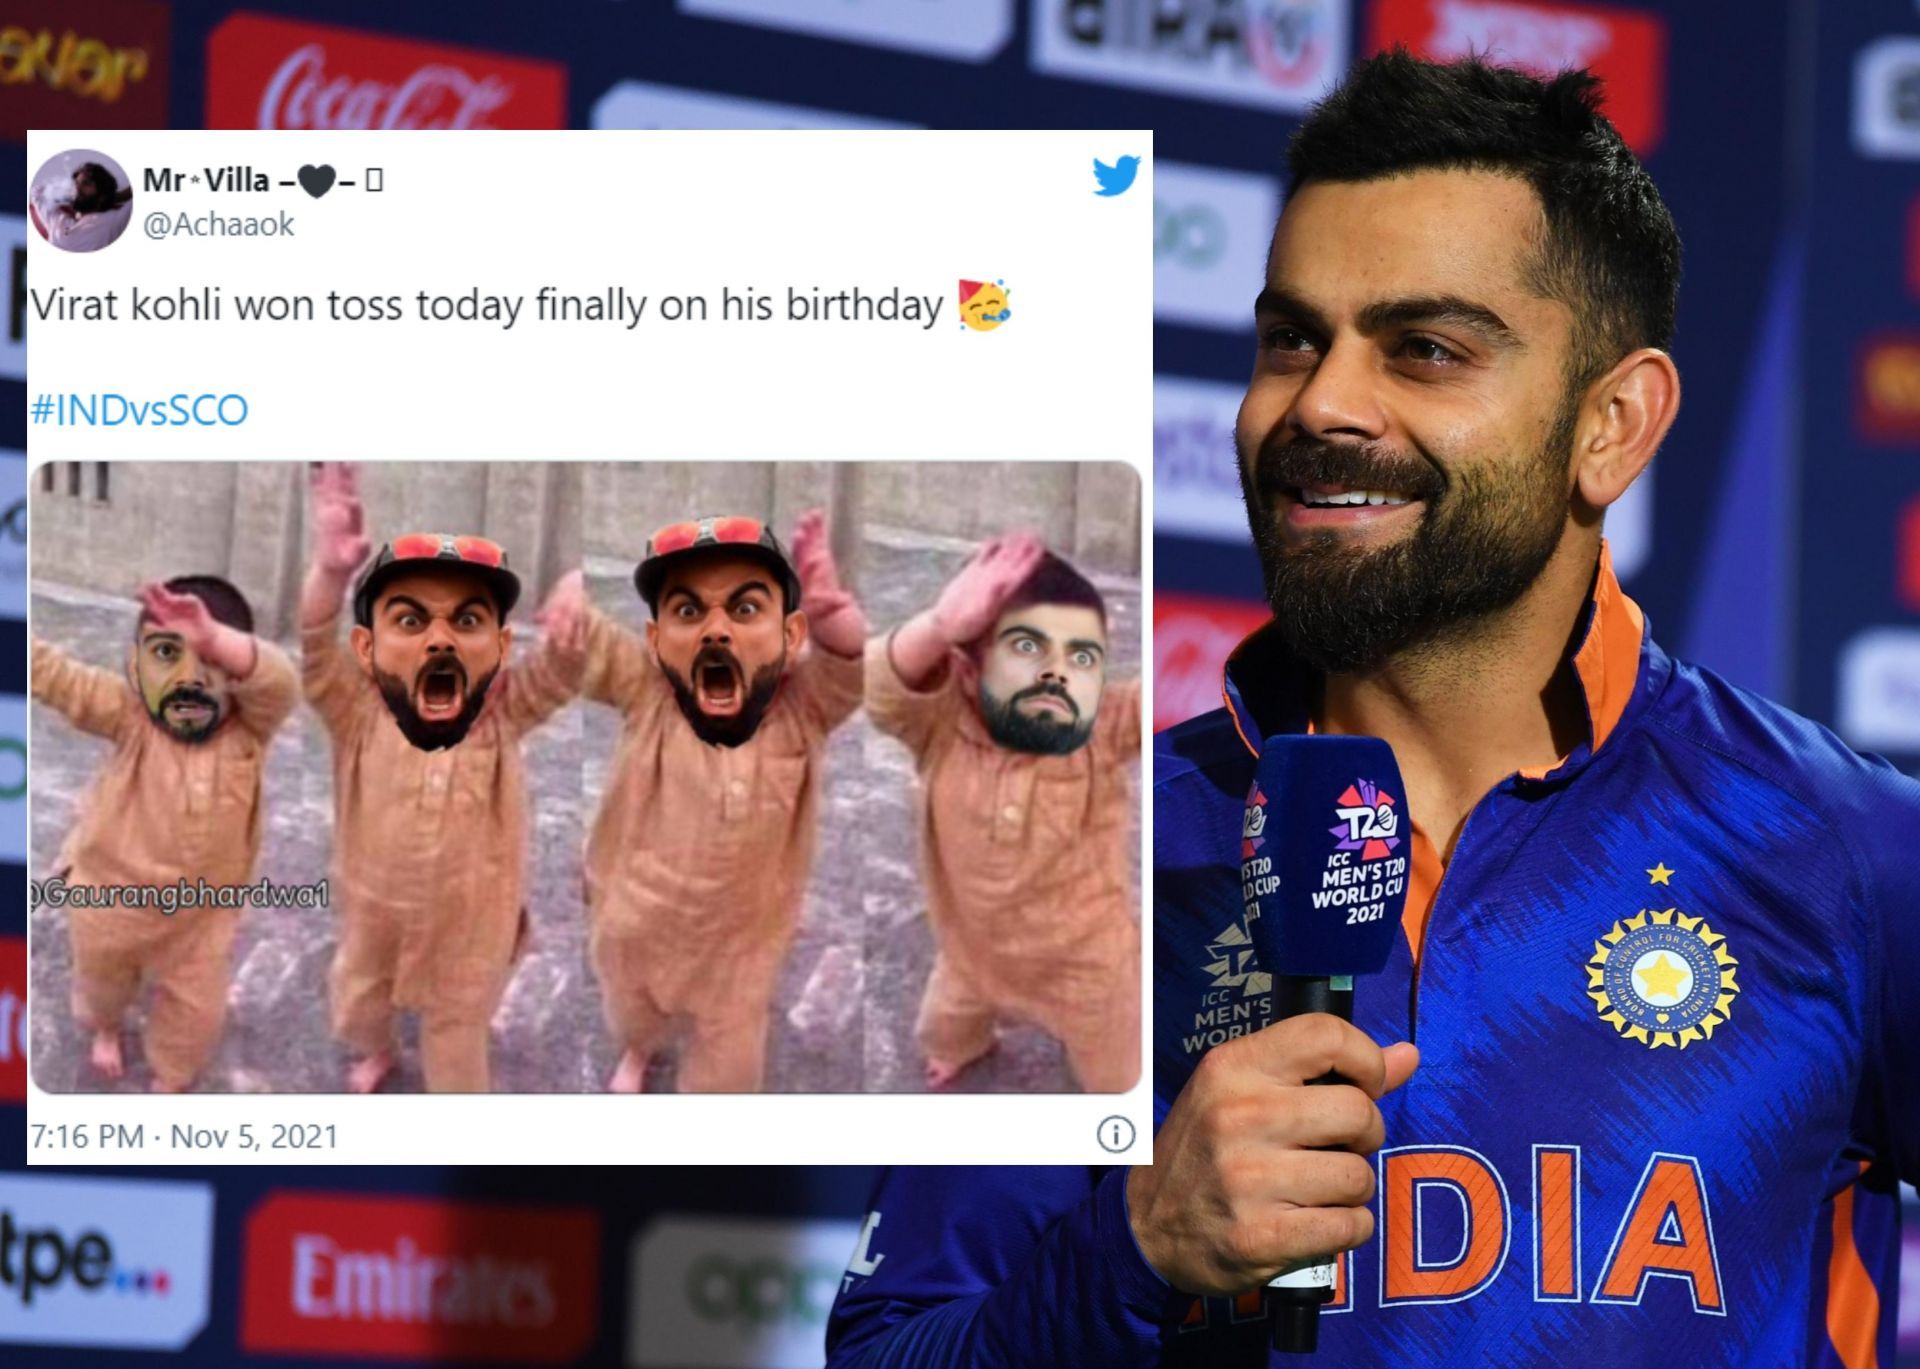 Fans delighted as Virat Kohli finally wins the toss on his birthday against Scotland.